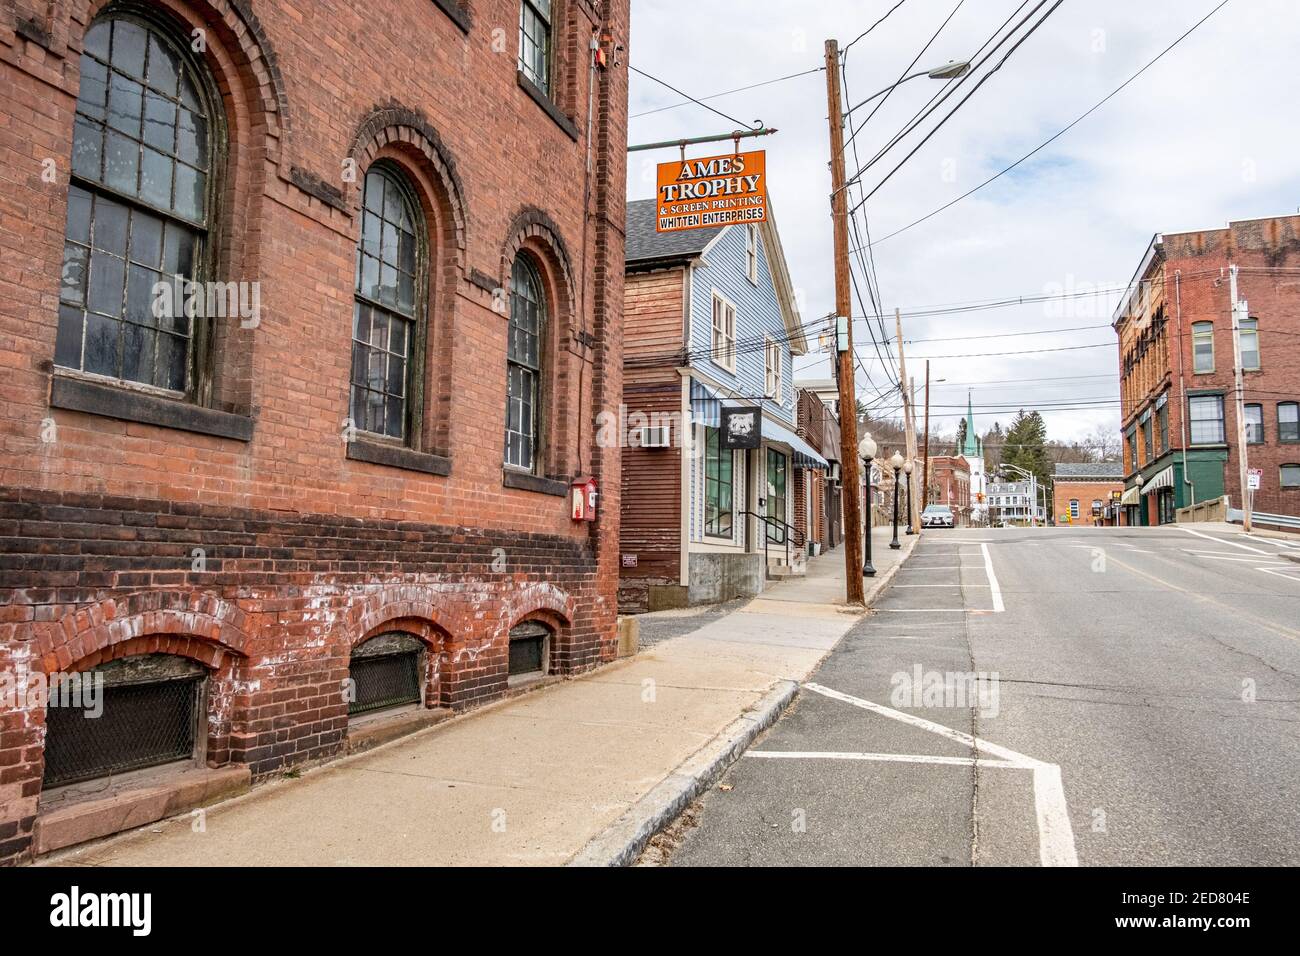 Stores in the rural Franklin County town of Orange, Massachusetts Stock Photo